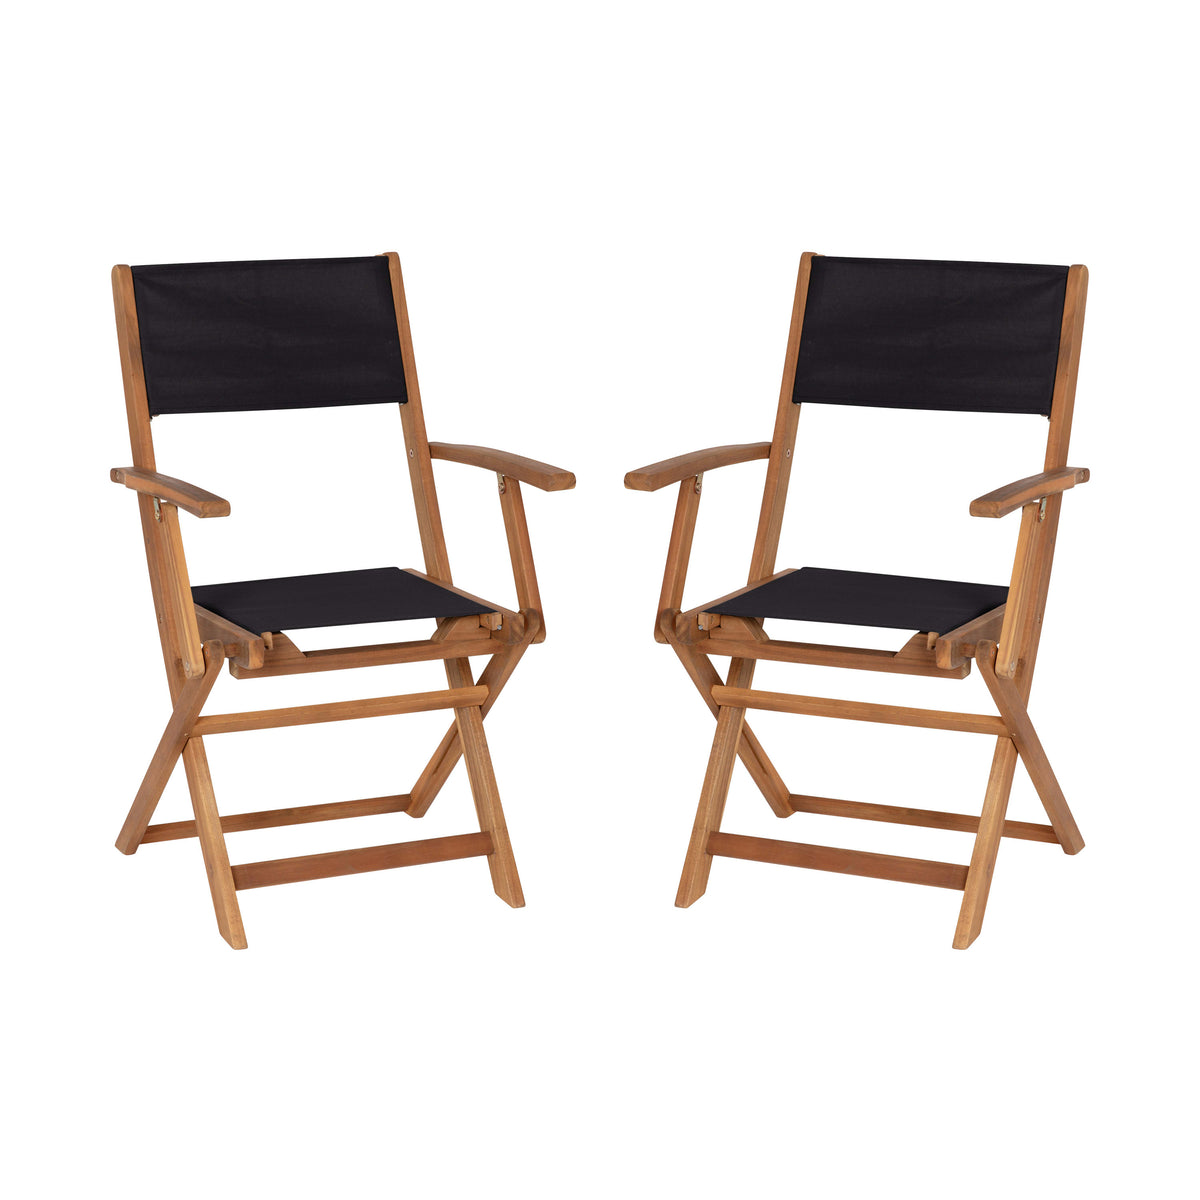 2PK All-Weather Acacia Wood and Mesh Folding Bistro Armchairs - Natural/Black